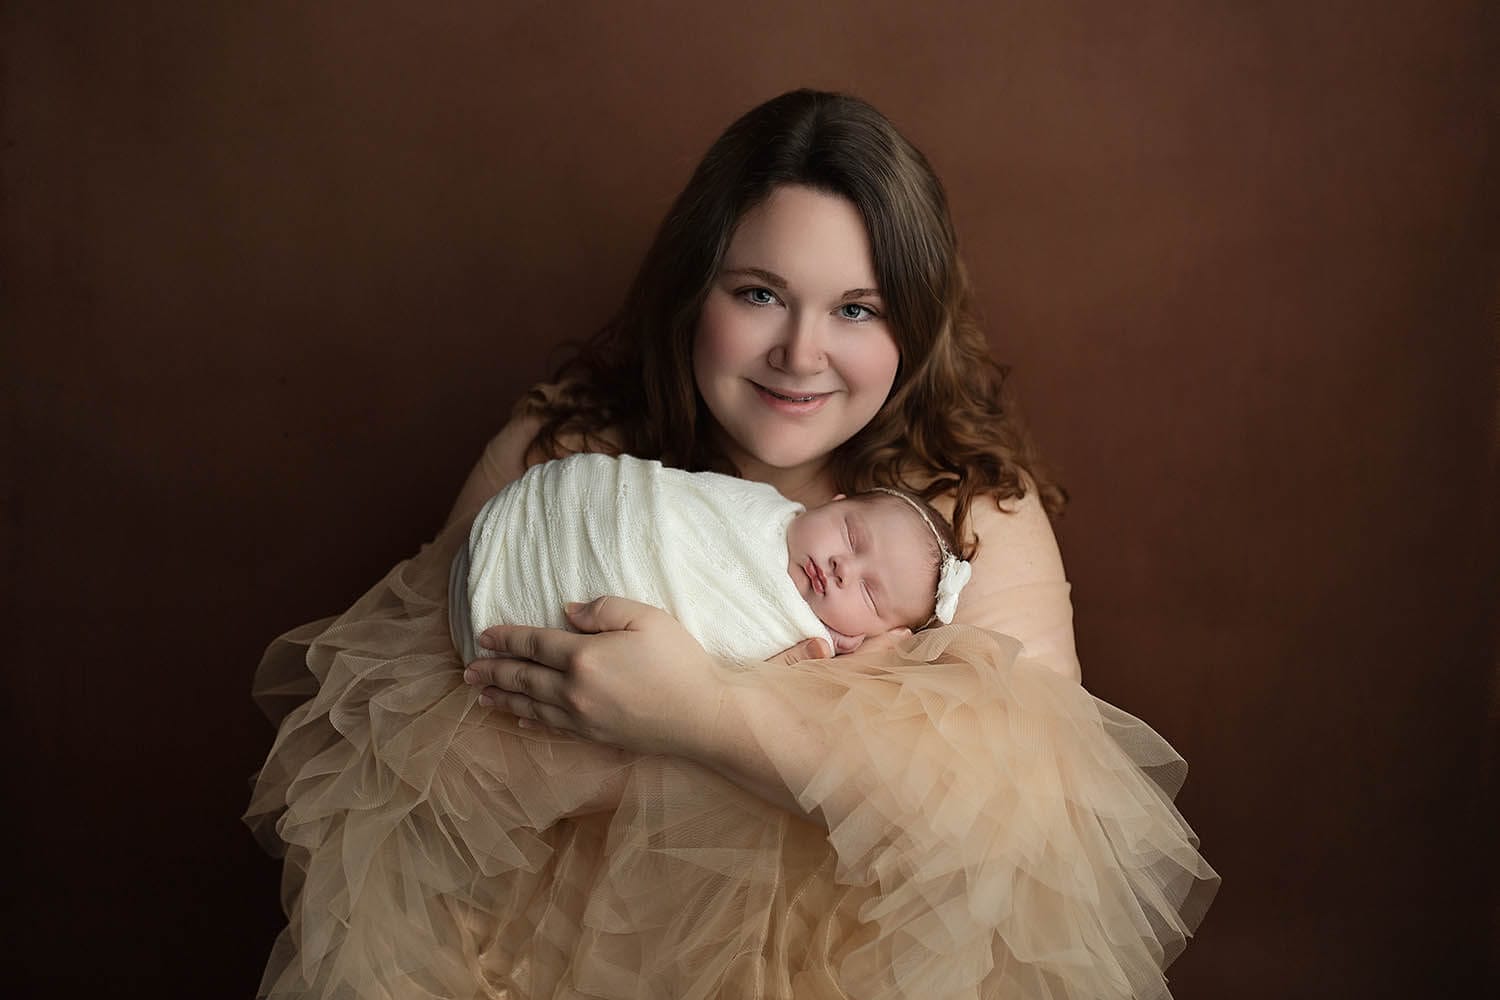 A new mother in a tan tule dress cradles her sleeping newborn baby girl in her arms thanks to lactation consultant new orleans